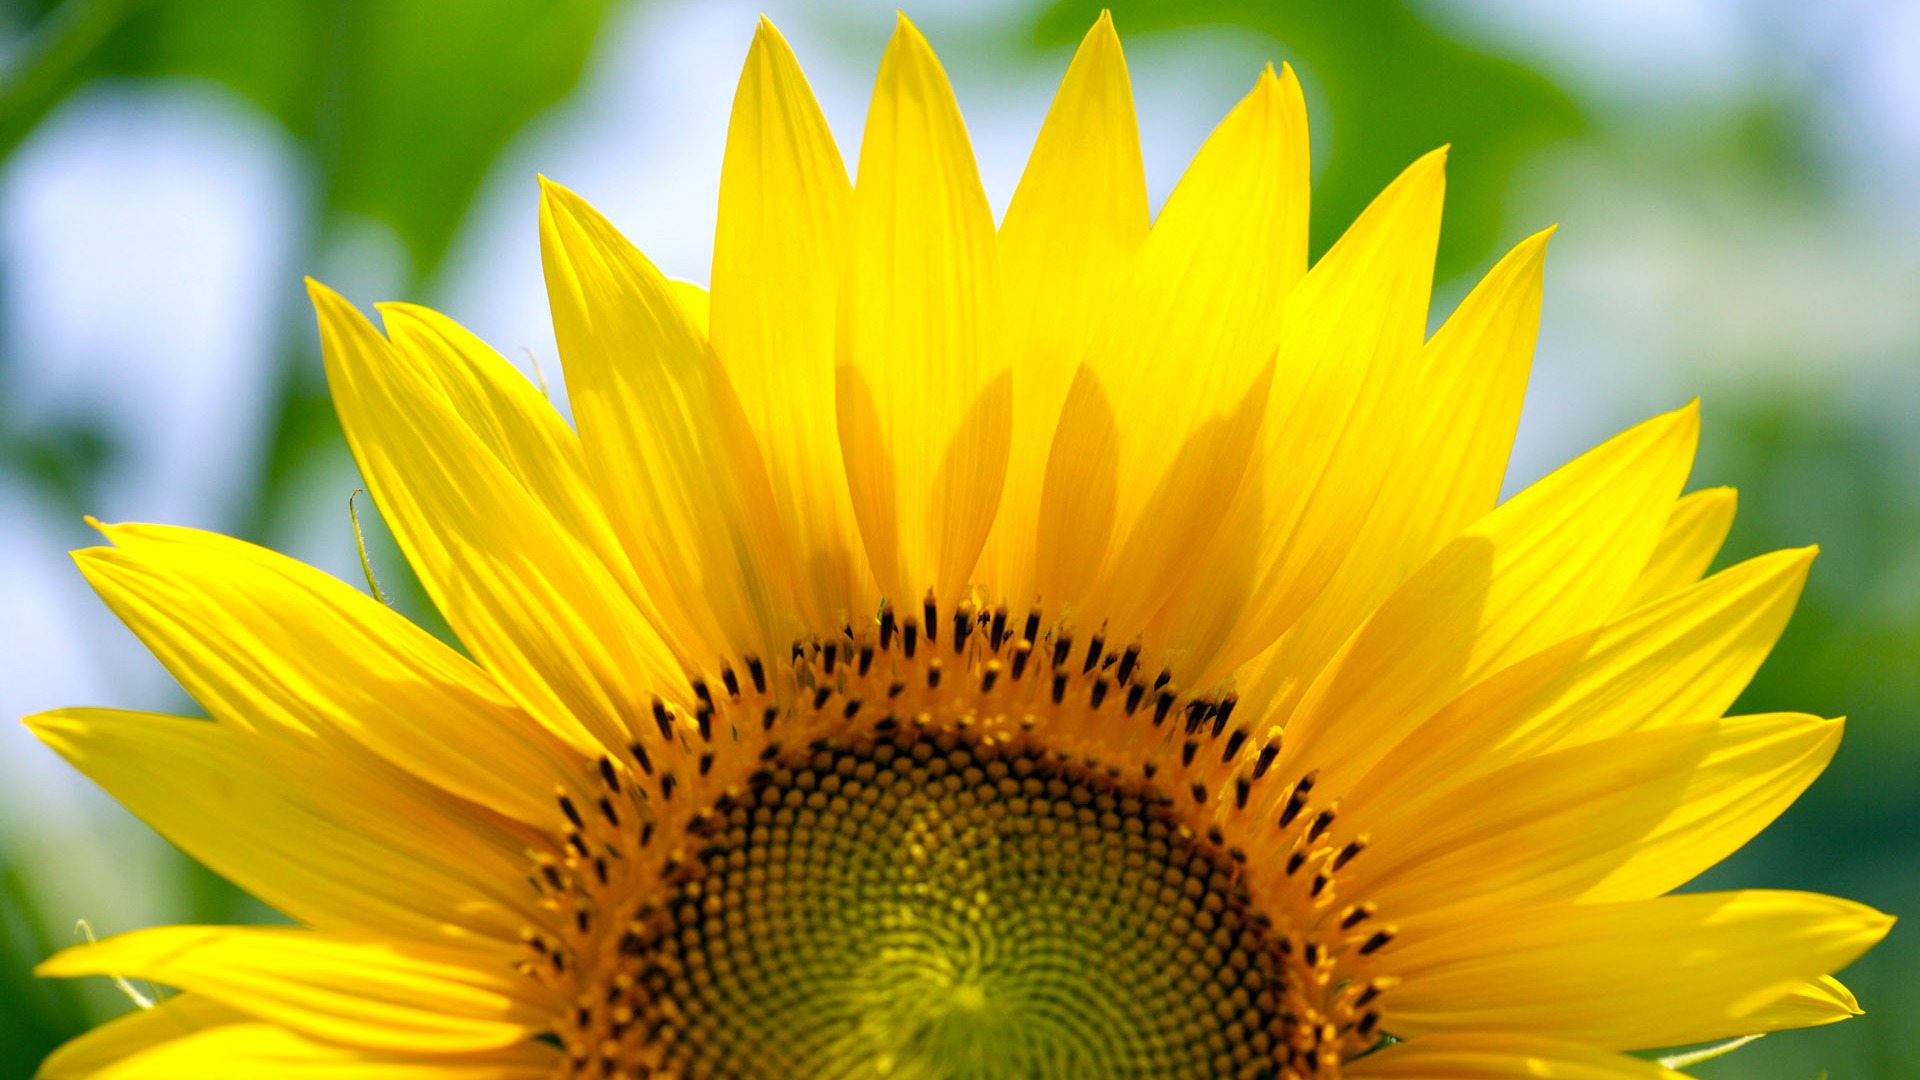 Sunny sunflower photo HD Wallpapers #20 - 1920x1080